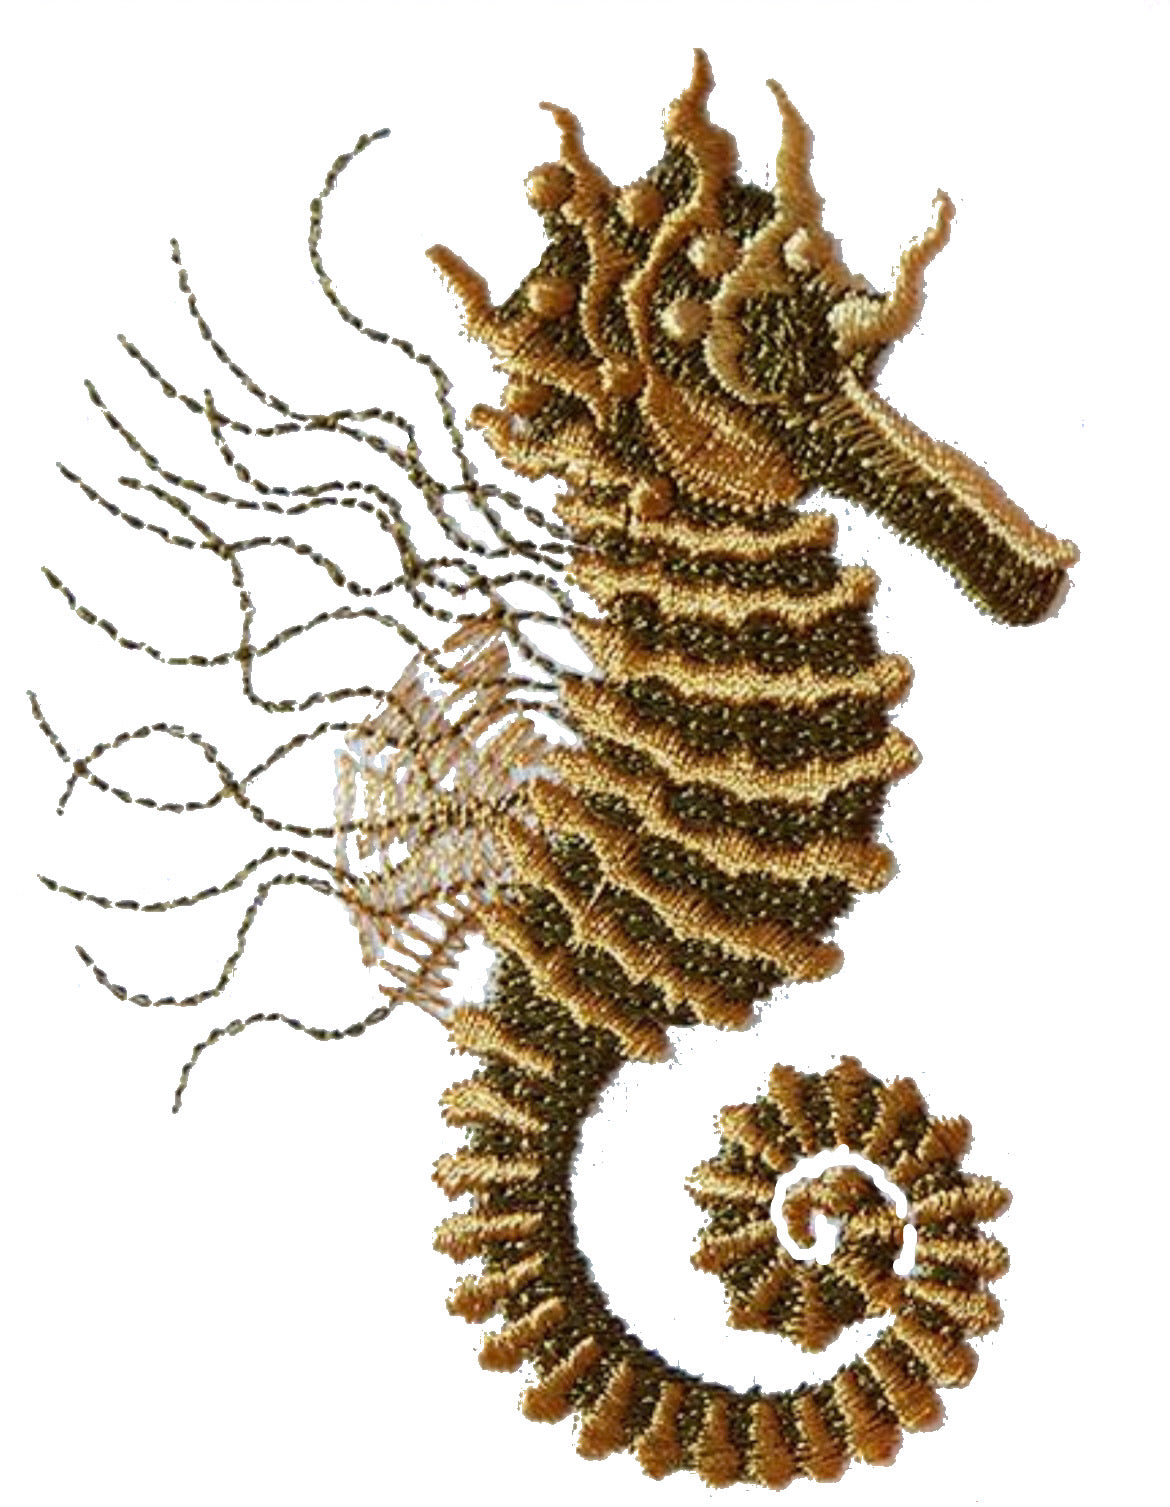 Seahorse Embroidered Bath Hand Towel. Beautifully Detailed in Coppery Shades